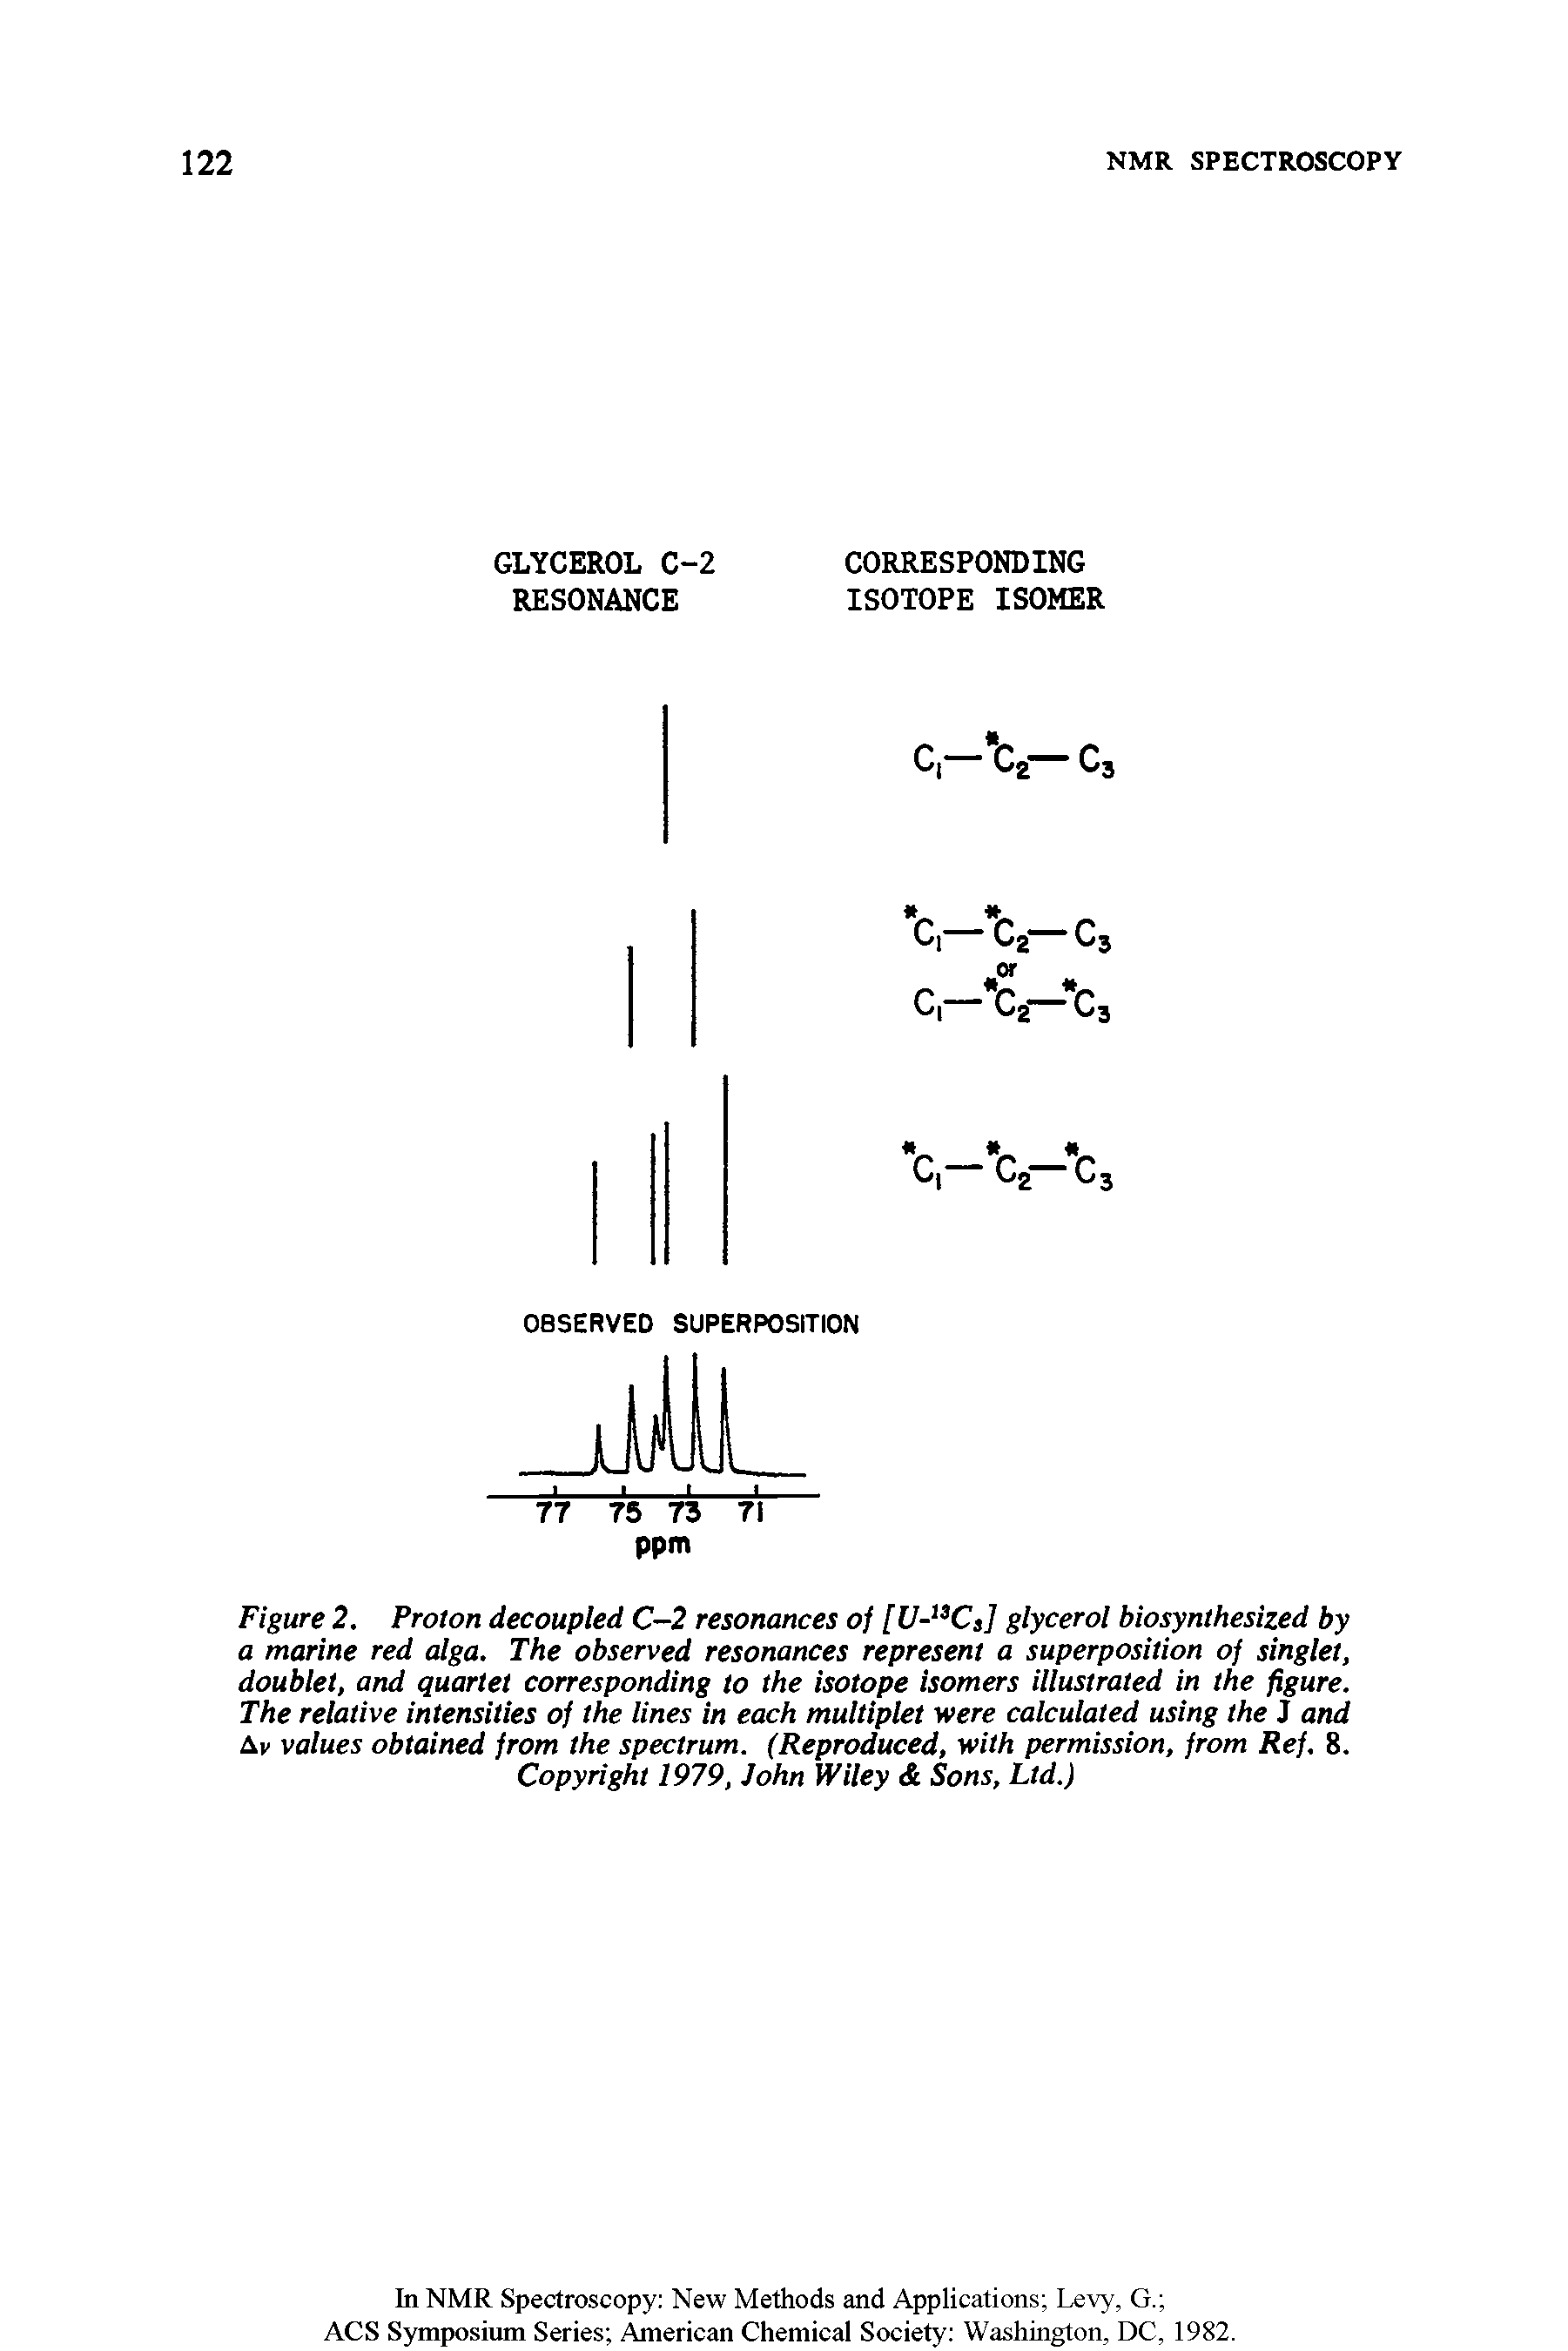 Figure 2. Proton decoupled C-2 resonances of [U- Ca] glycerol biosynthesized by a marine red alga. The observed resonances represent a superposition of singlet, doublet, and quartet corresponding to the isotope isomers illustrated in the figure. The relative intensities of the lines in each multiplet were calculated using the J and Ac values obtained from the spectrum. (Reproduced, with permission, from Ref. 8. Copyright 1979, John Wiley Sons, Ltd.)...